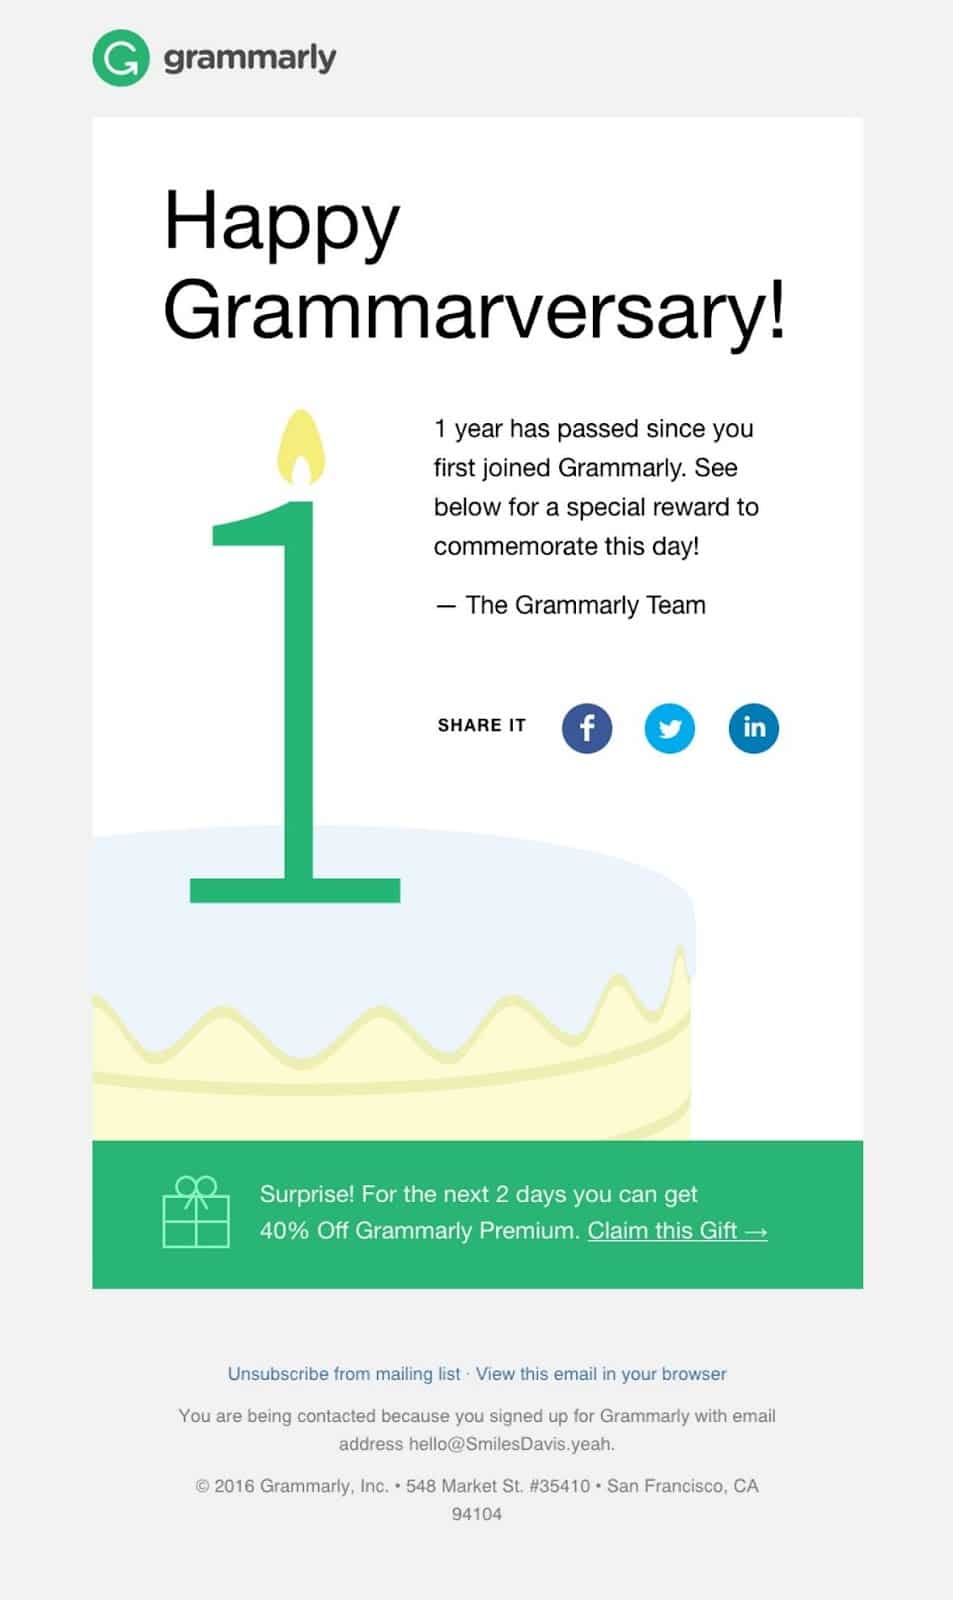 Grammarly email example of appreciating customers